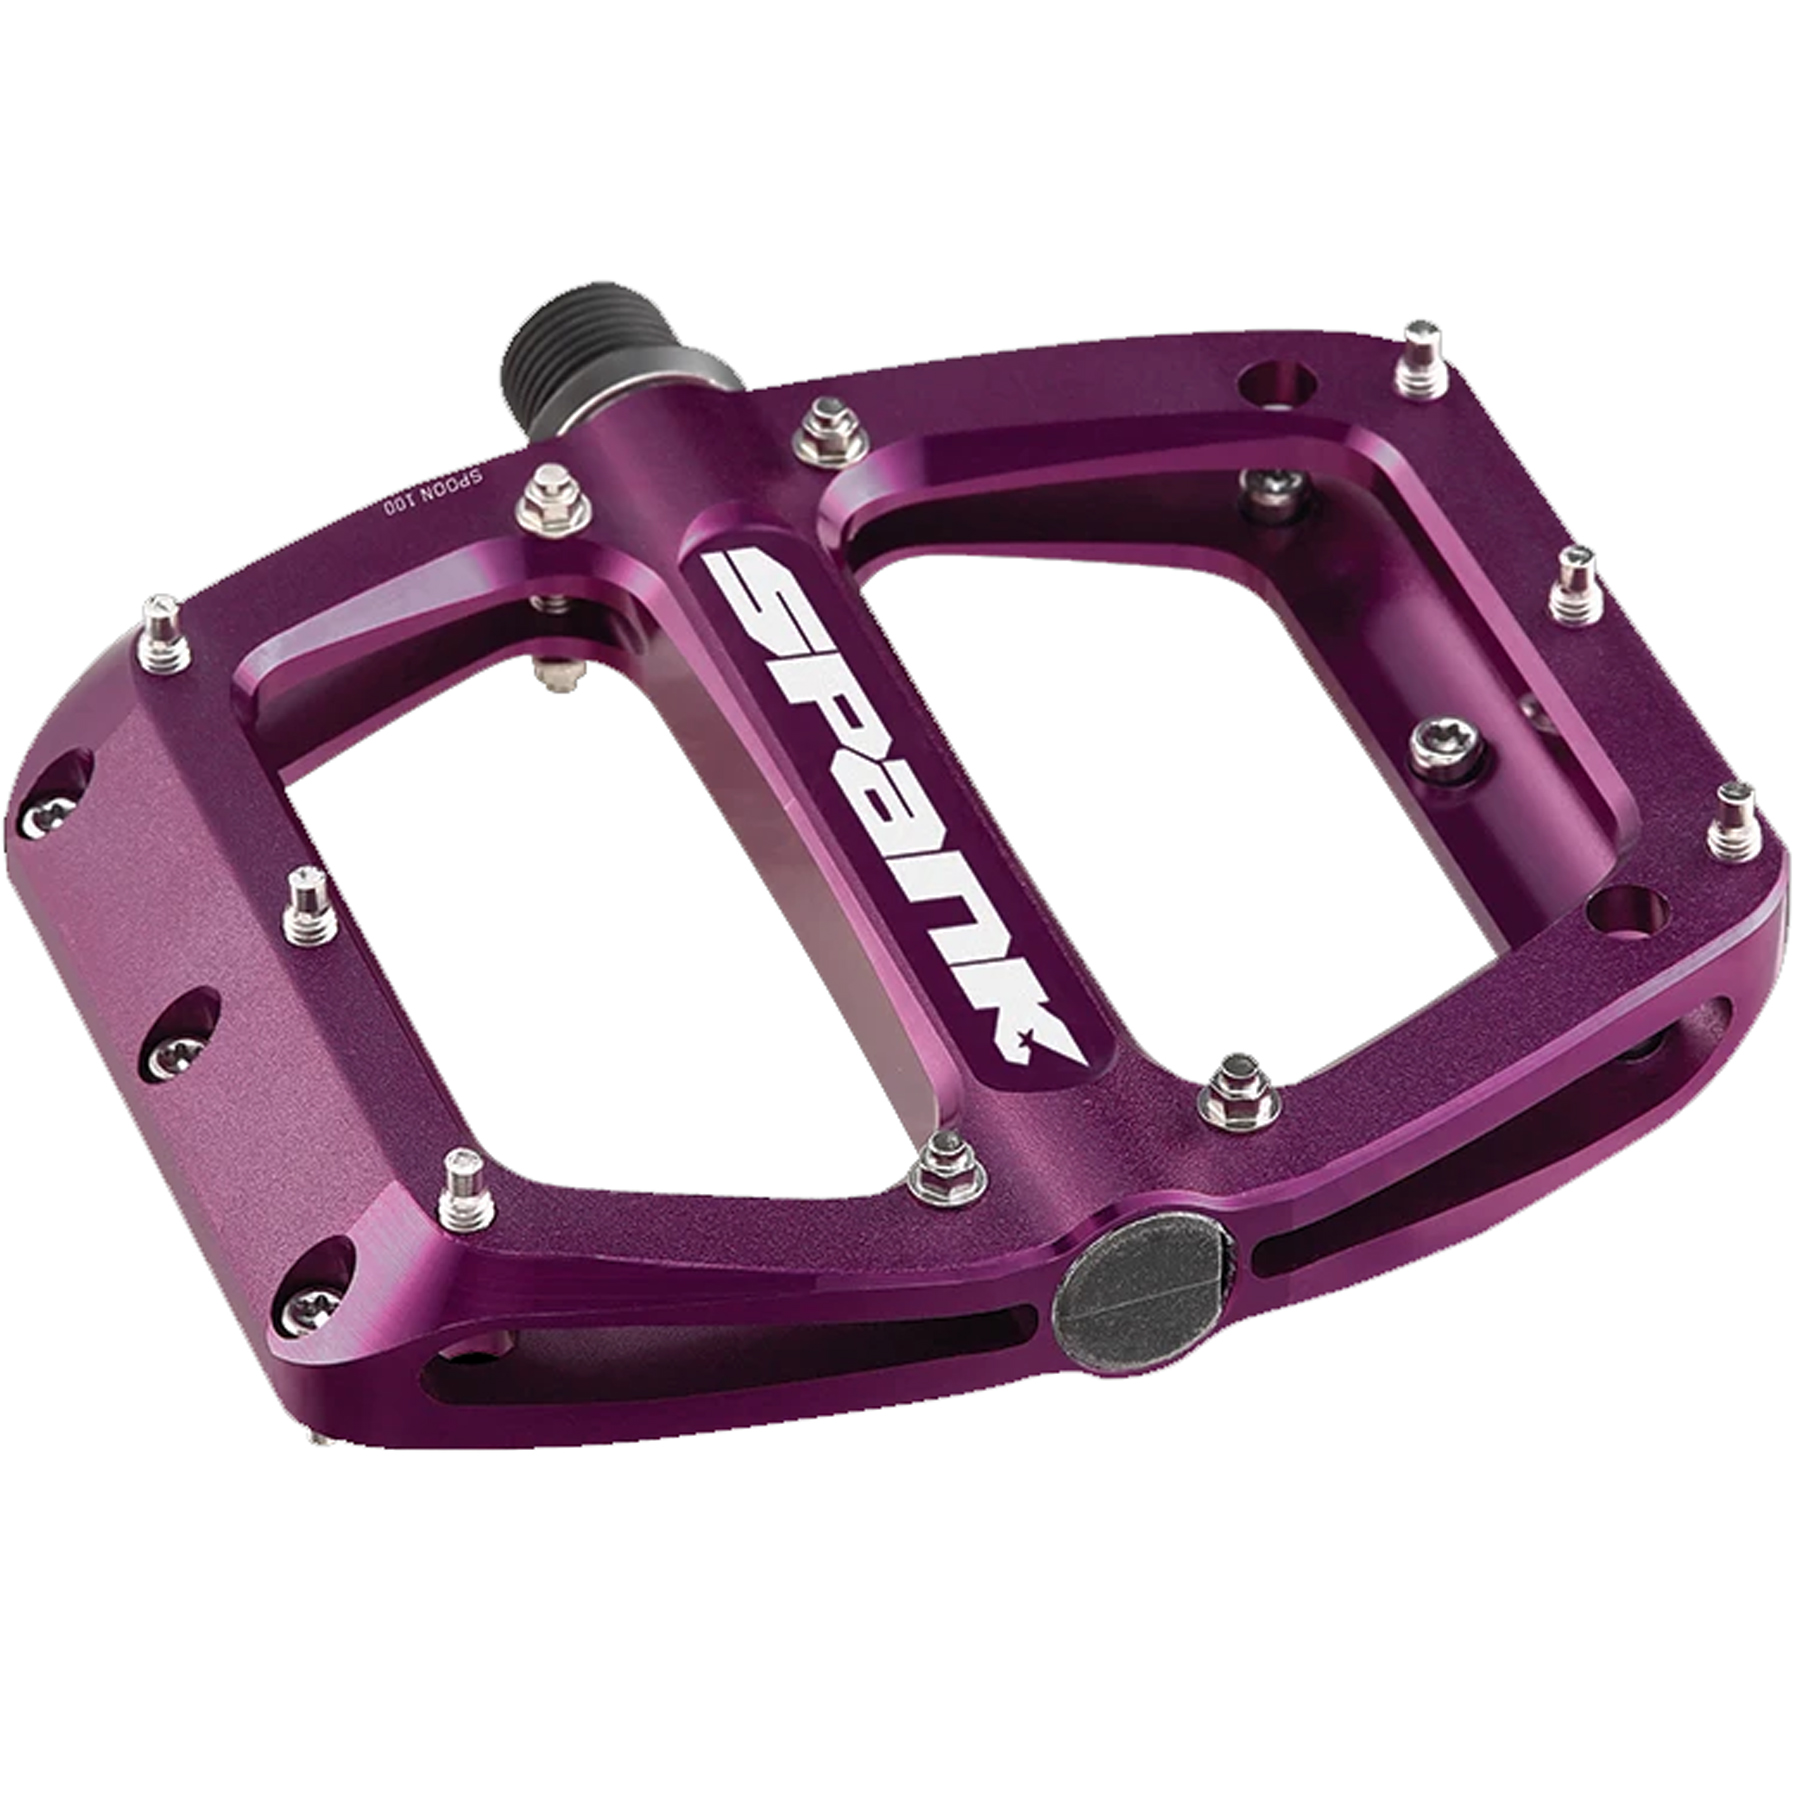 Bicycle PVC Pedals 1/2" Purple 202-356 New 